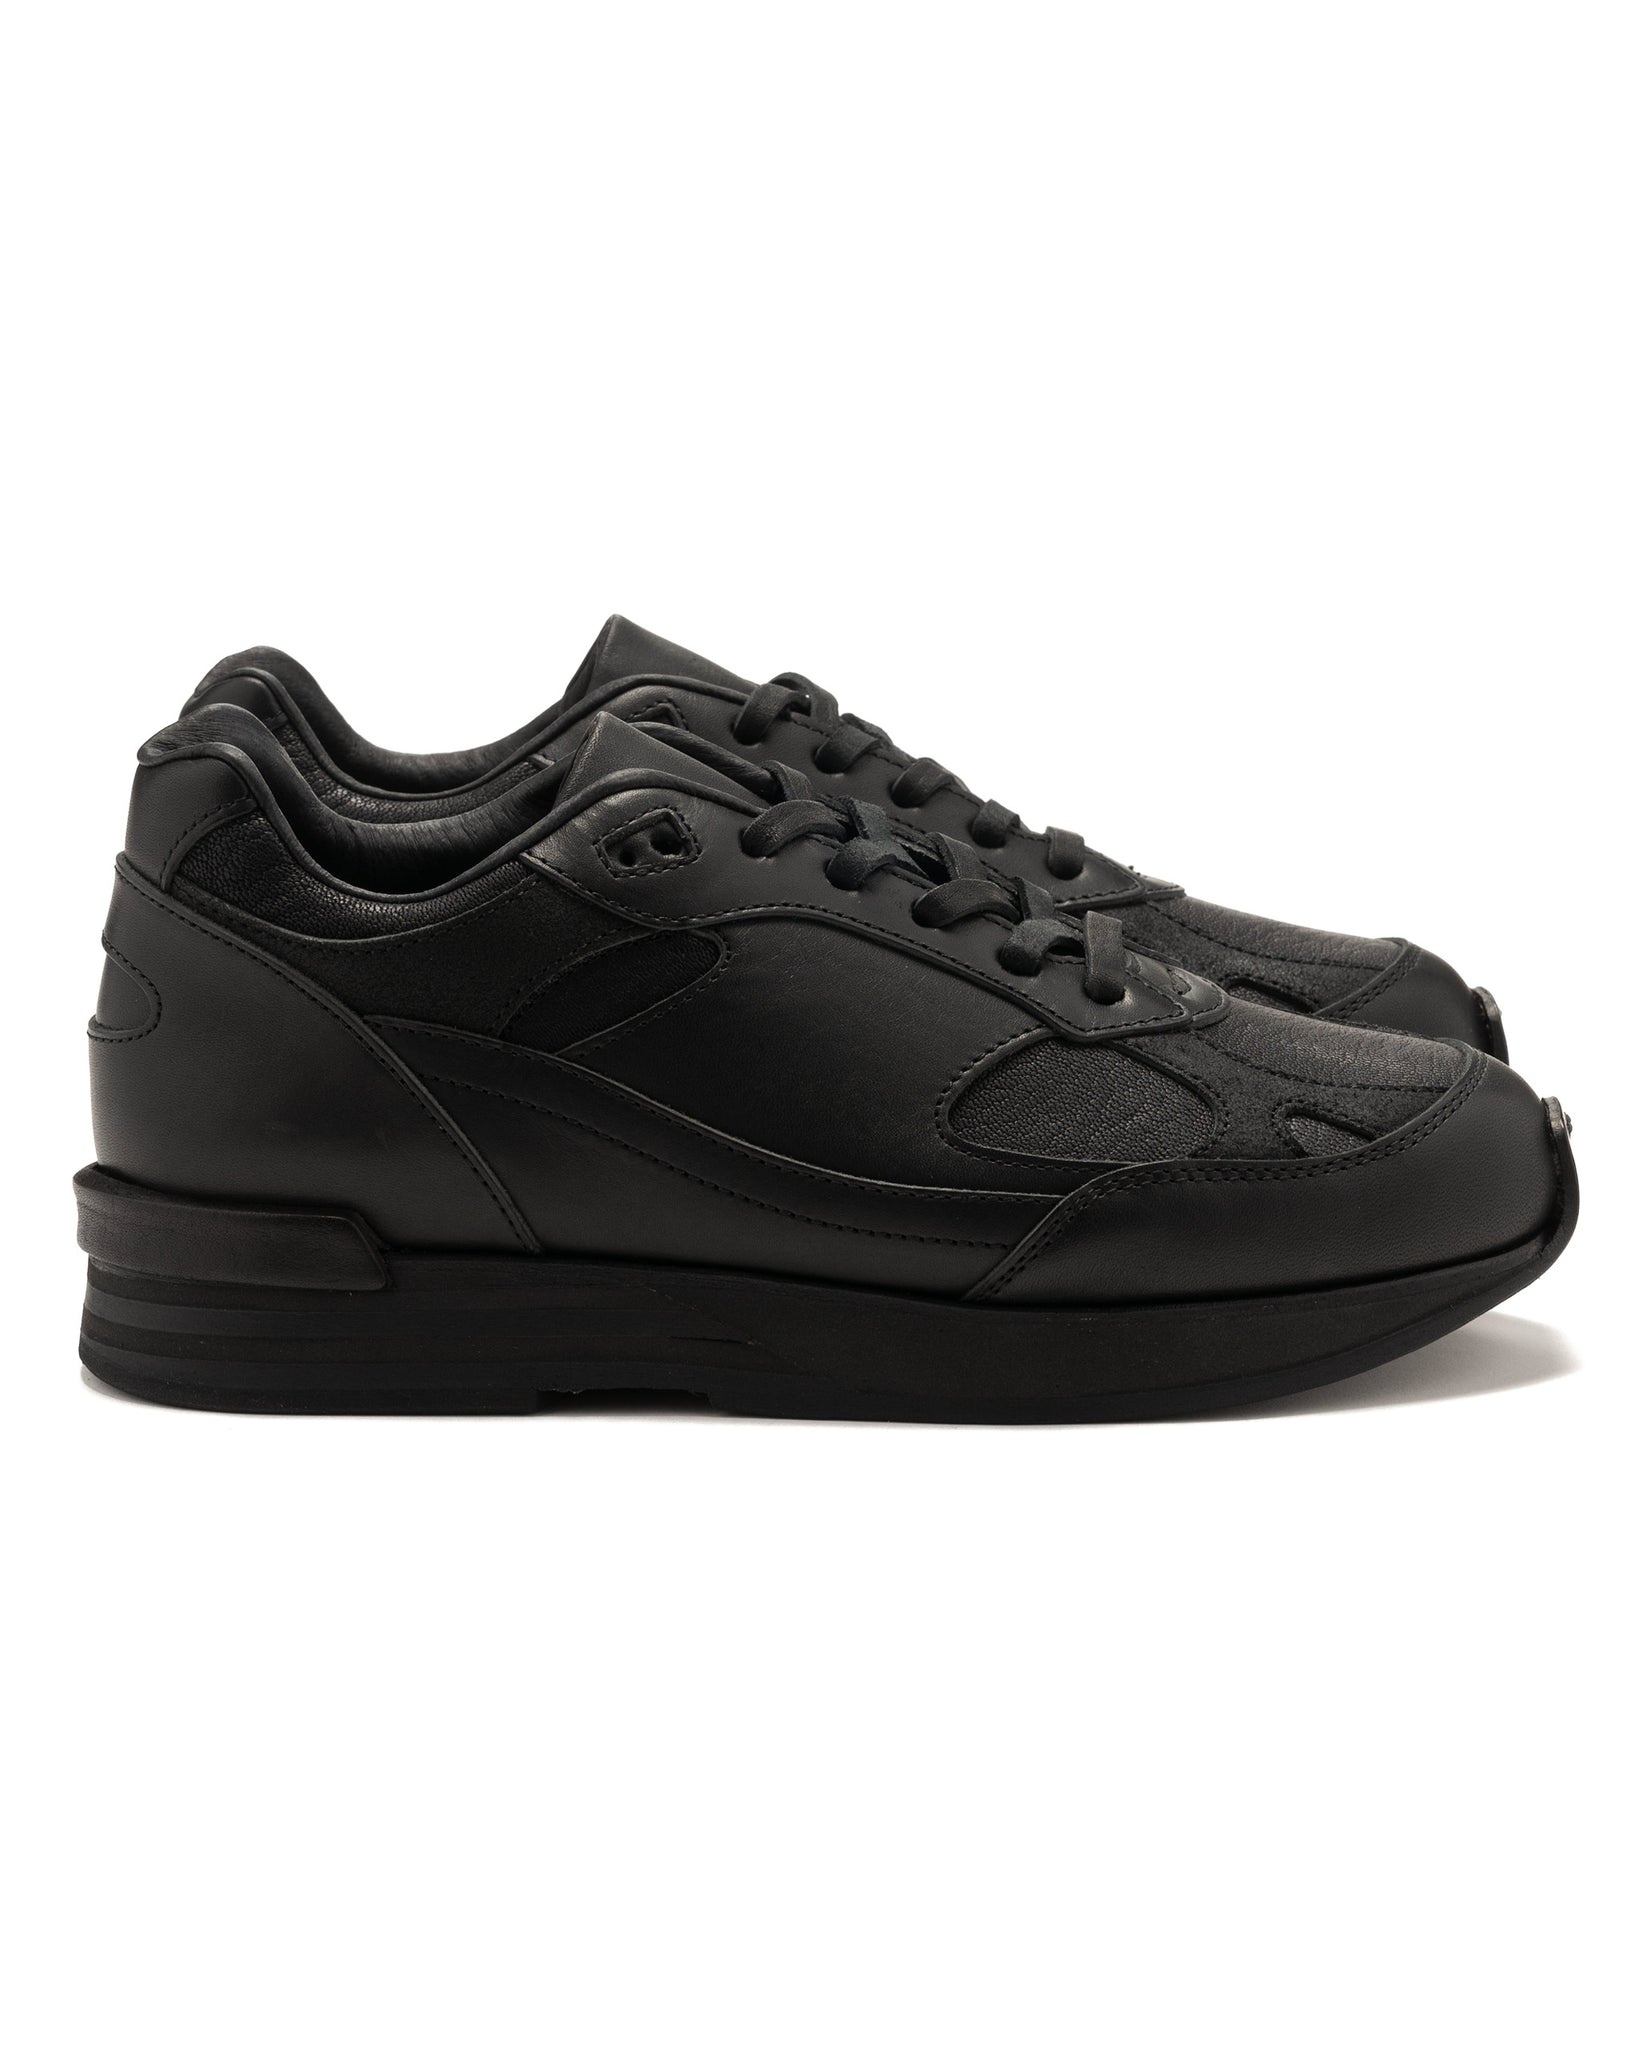 Hender Scheme Manual Industrial Products 28 Shoes Black